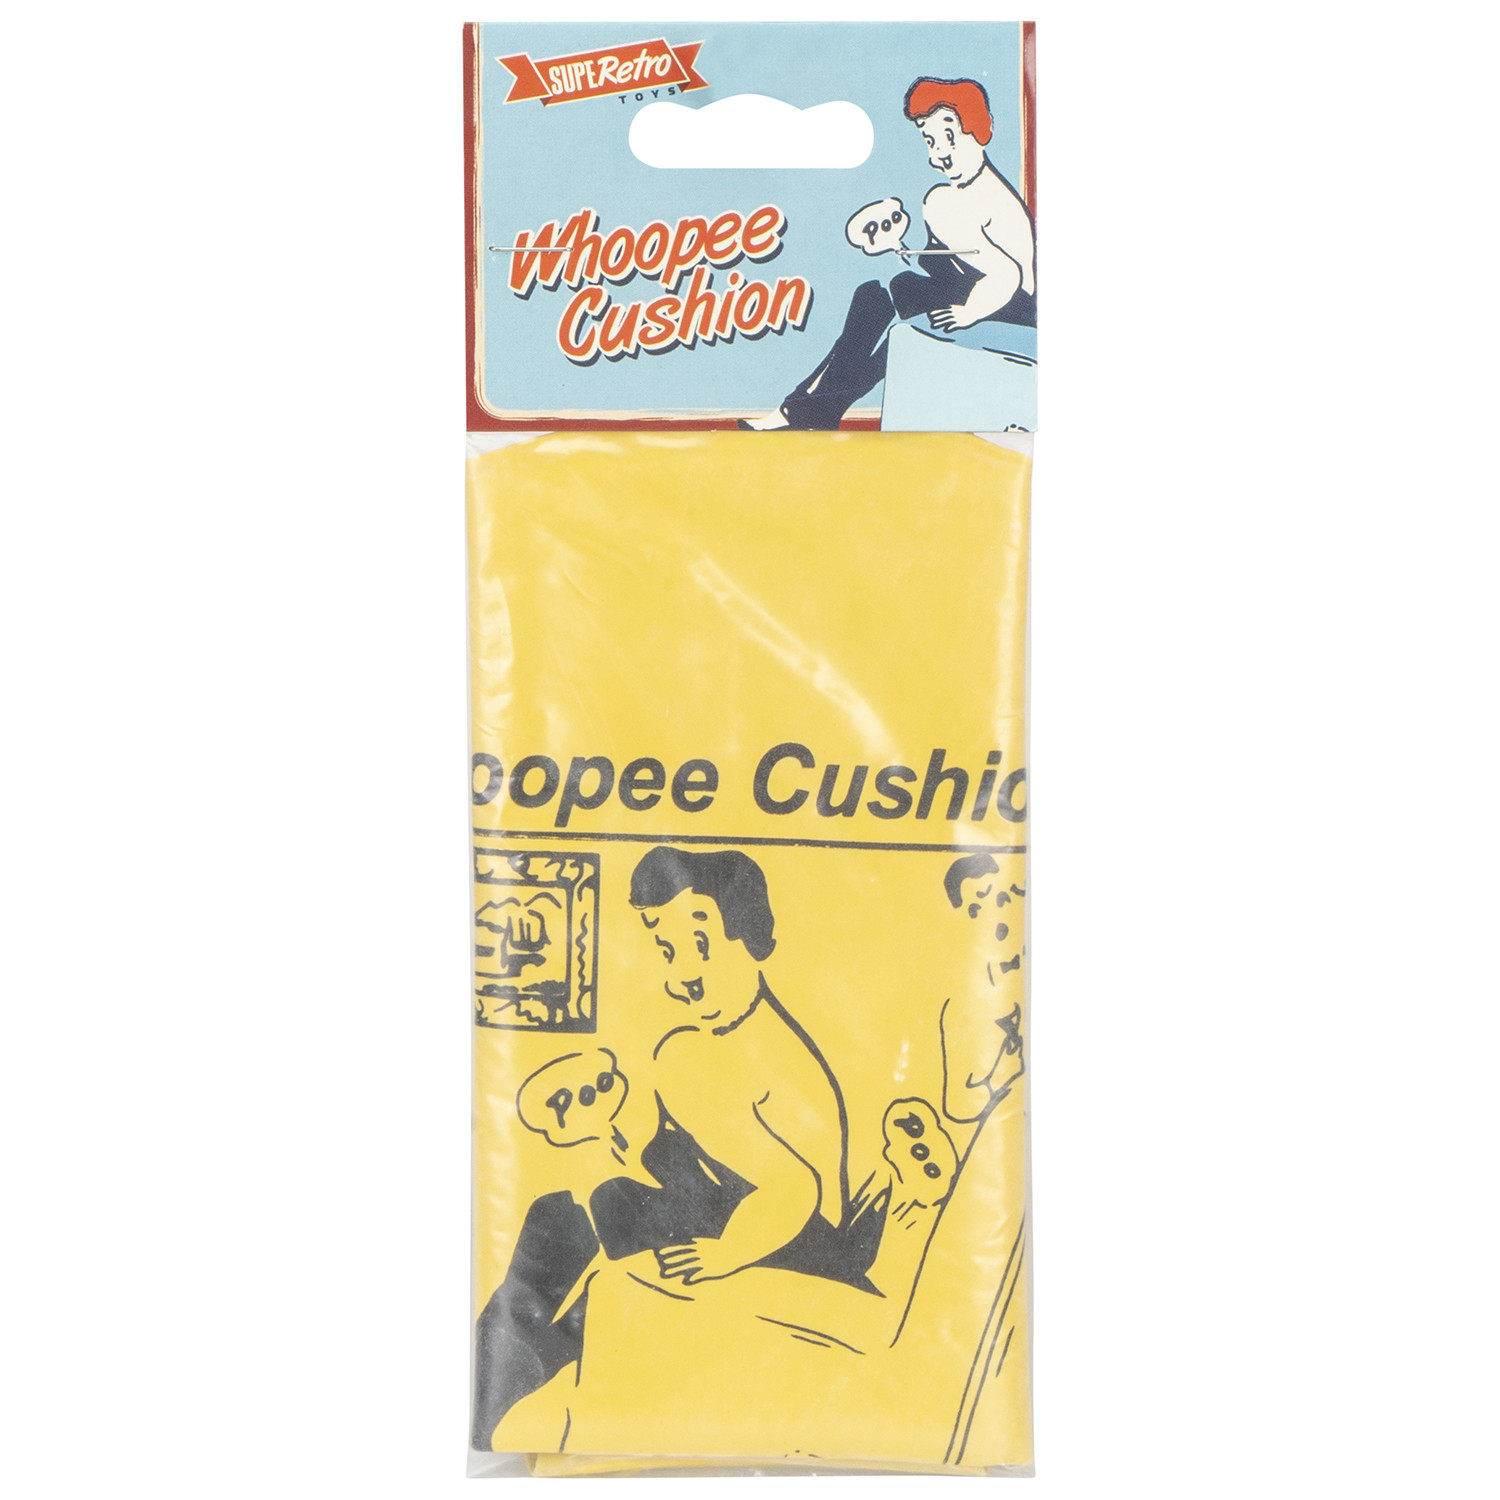 Single Super Retro Whoopee Cushion in Assorted styles Image 4